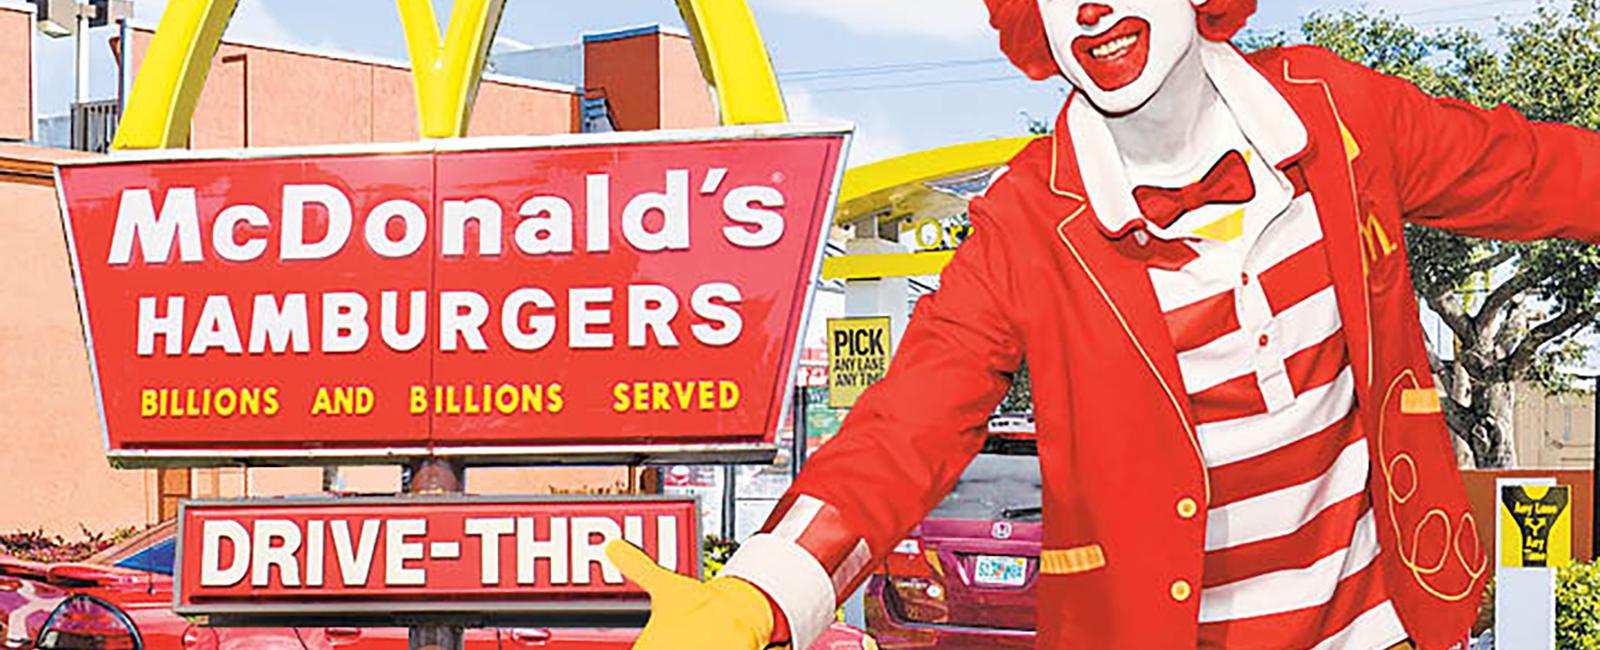 Mcdonalds calls frequent buyers of their food heavy users